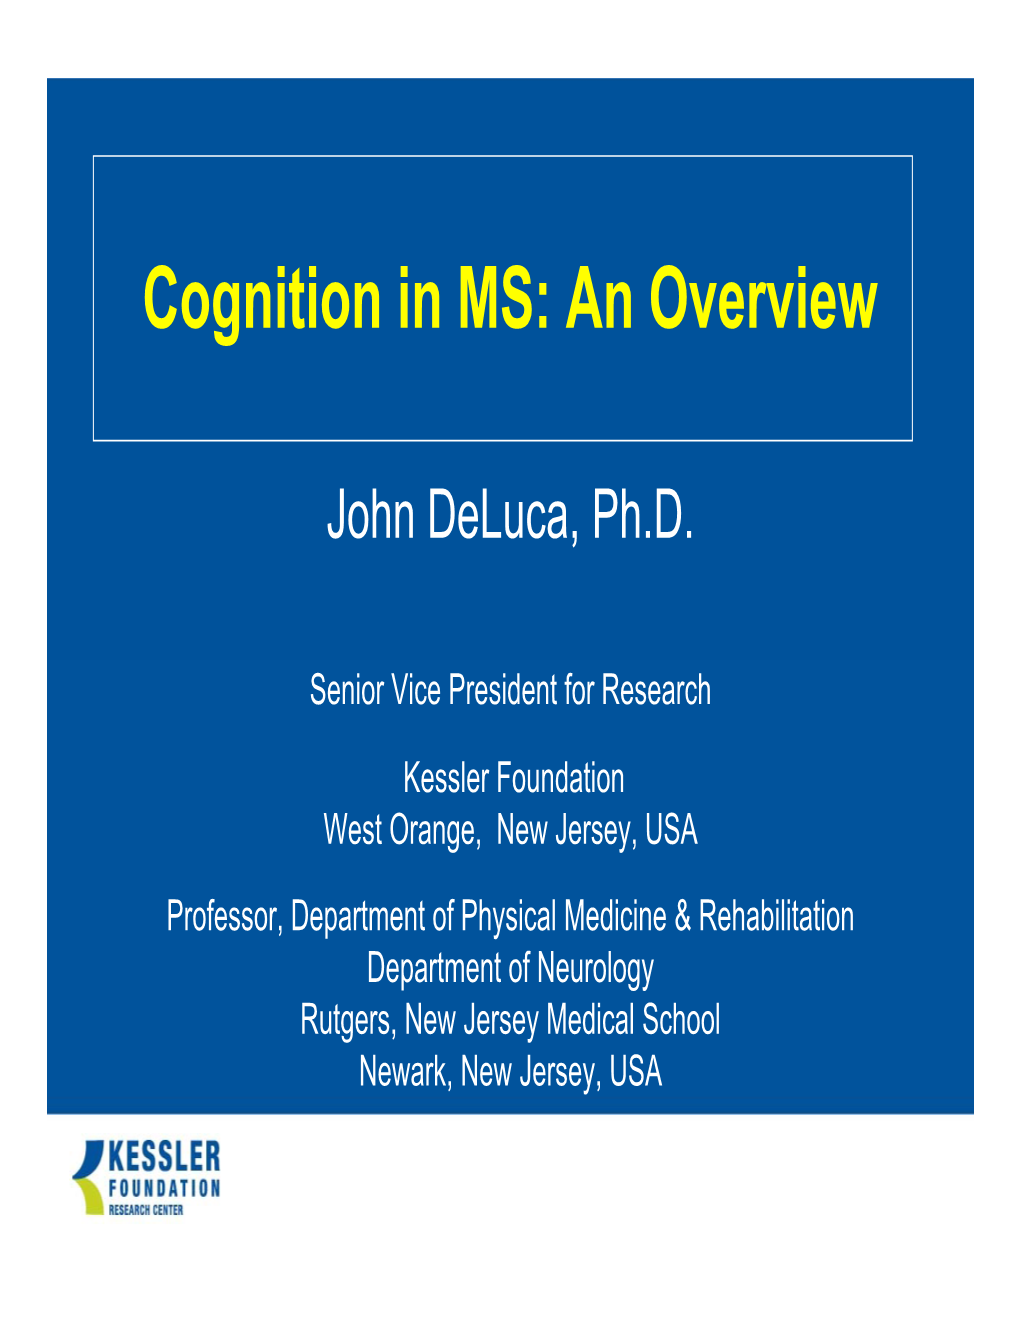 Cognition in MS: an Overview